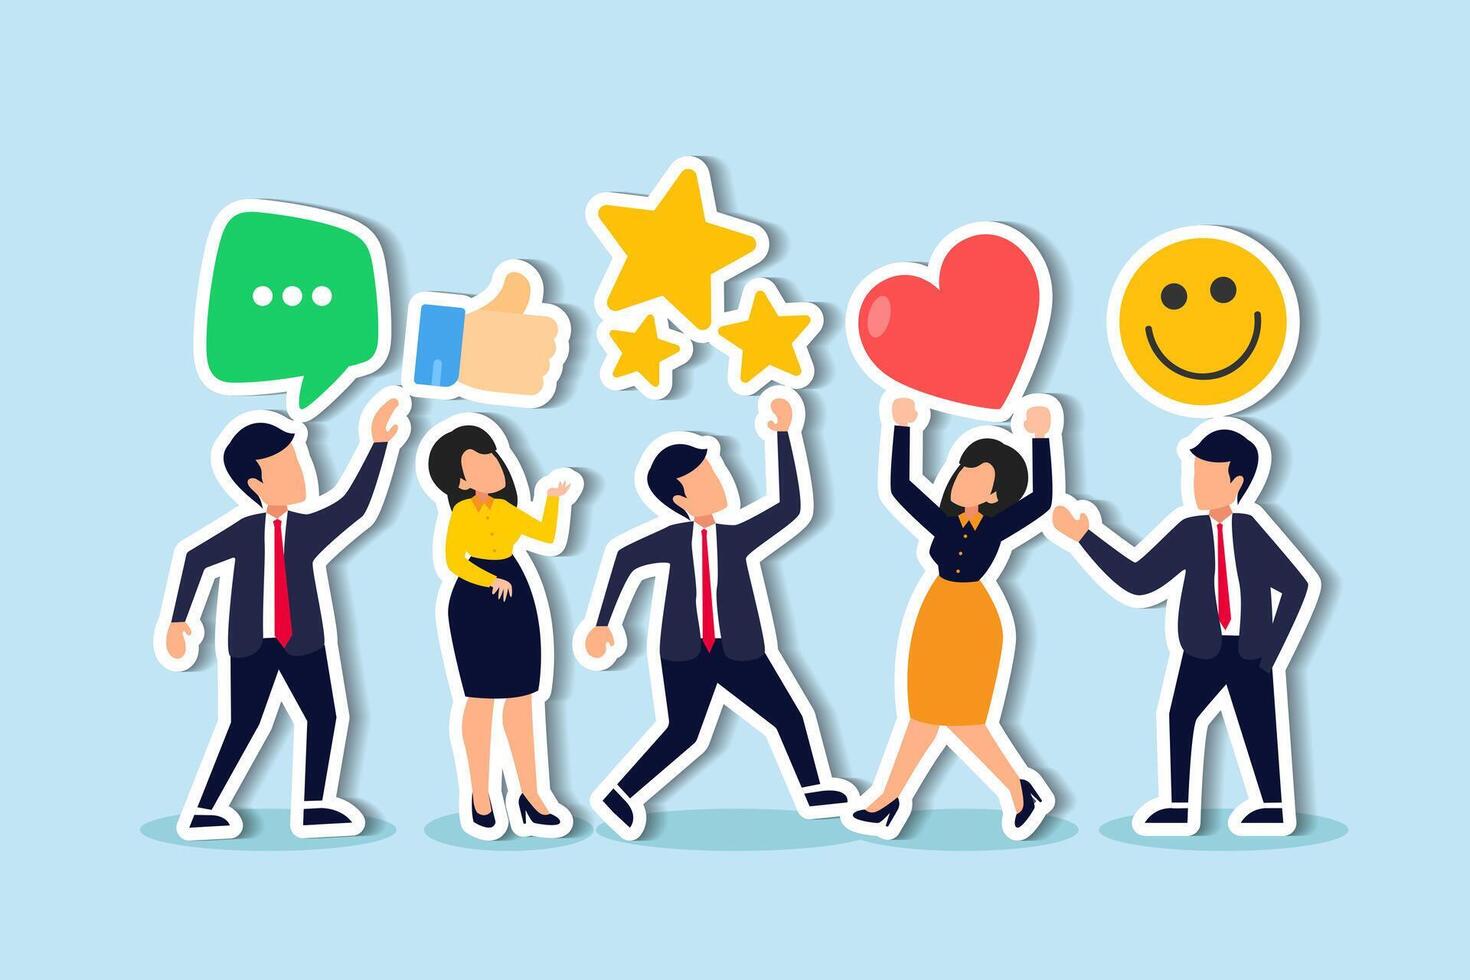 Customer feedback, user experience or client satisfaction, opinion for product and services, review rating or evaluation concept, young adult people giving emoticon feedback such as stars, thumbs up. vector